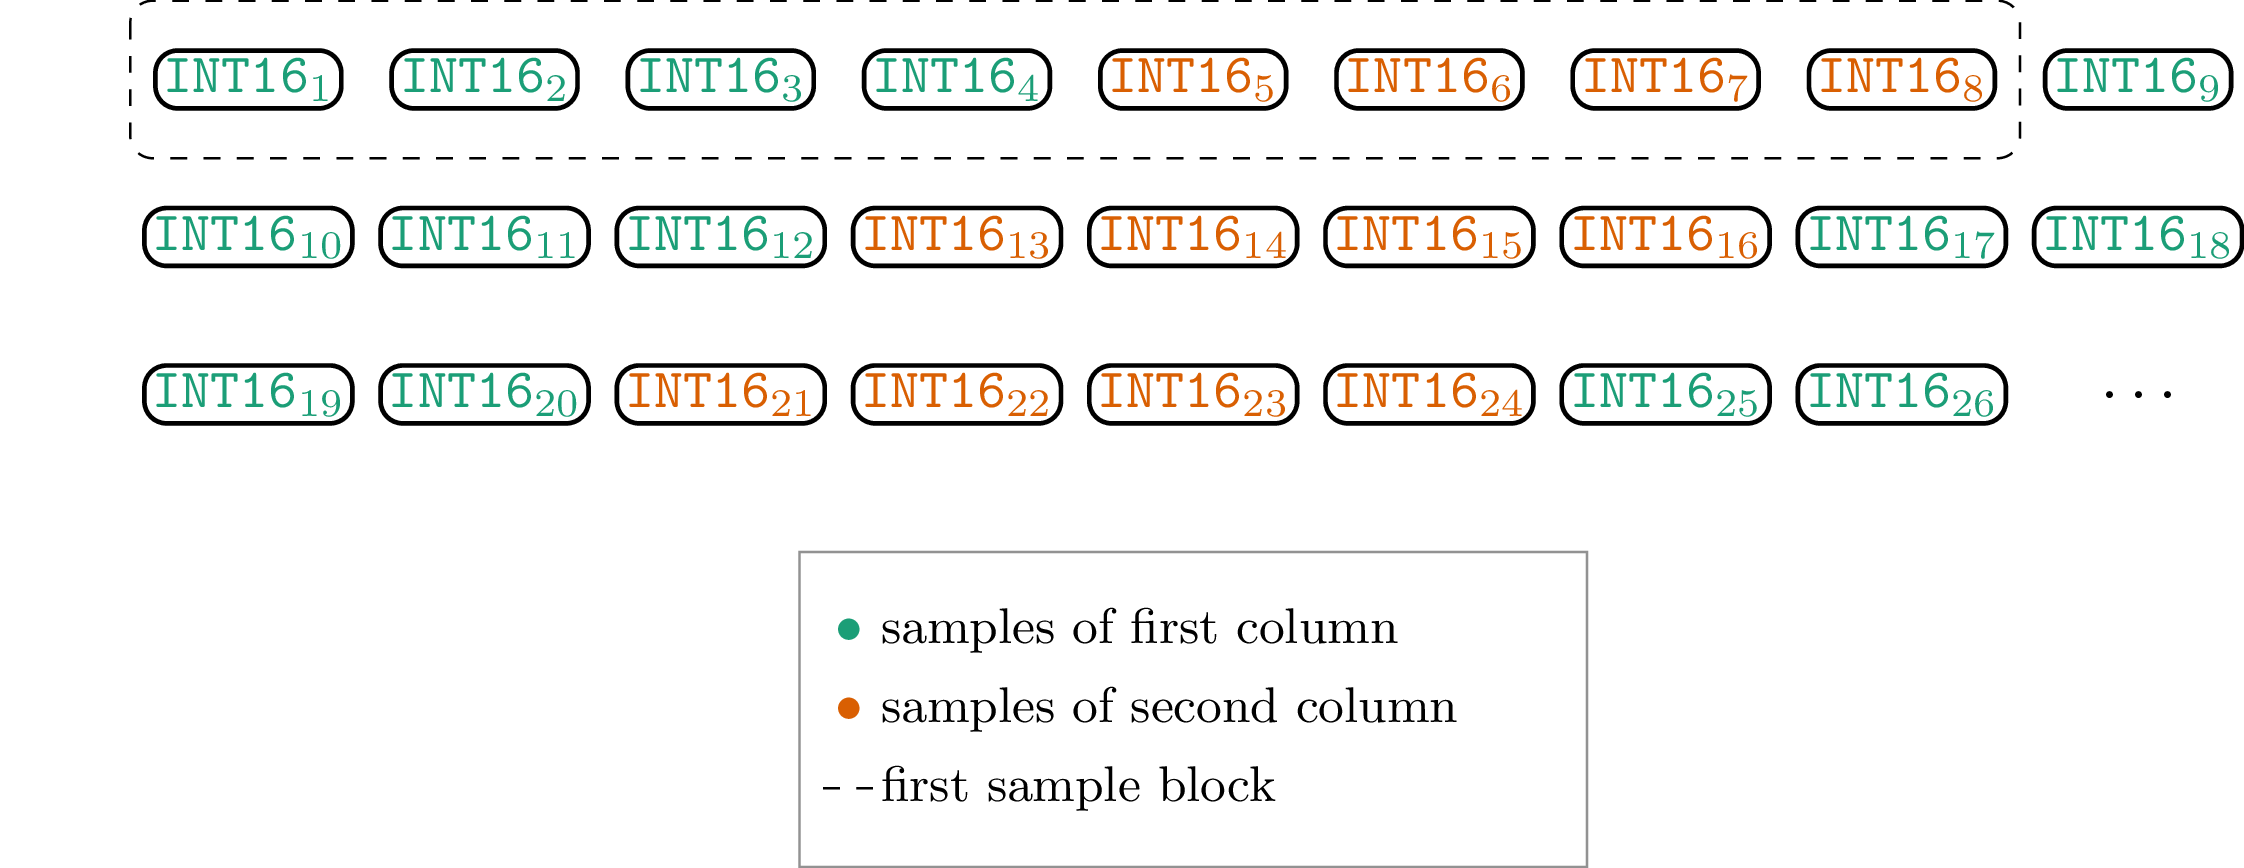 Schematic representation of the data block of the `msajc003.fms` file of the above R code snippet.